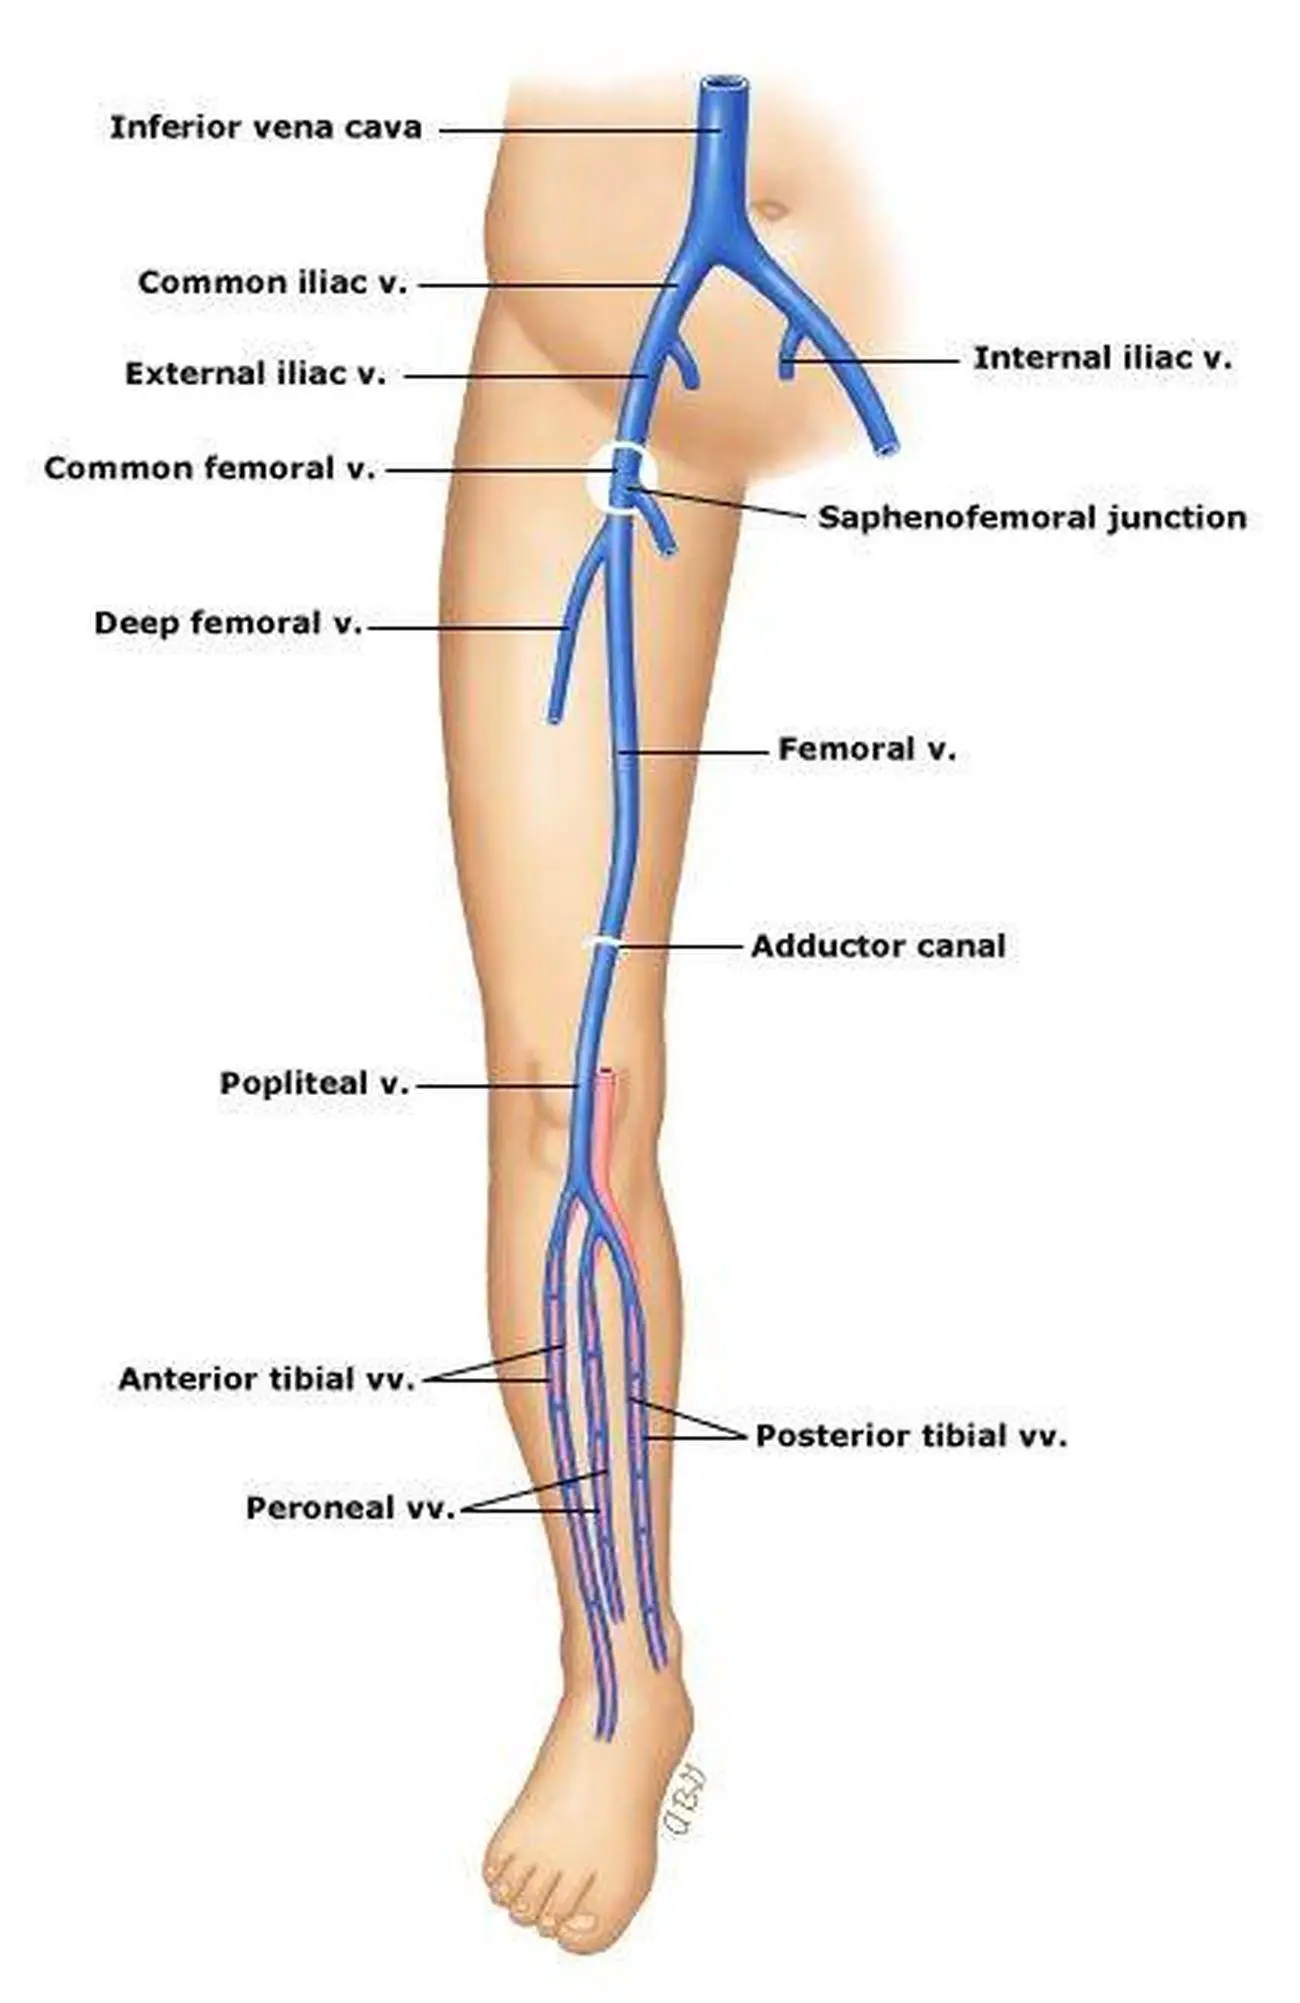 Pictures Of Anterior Tibial Vein